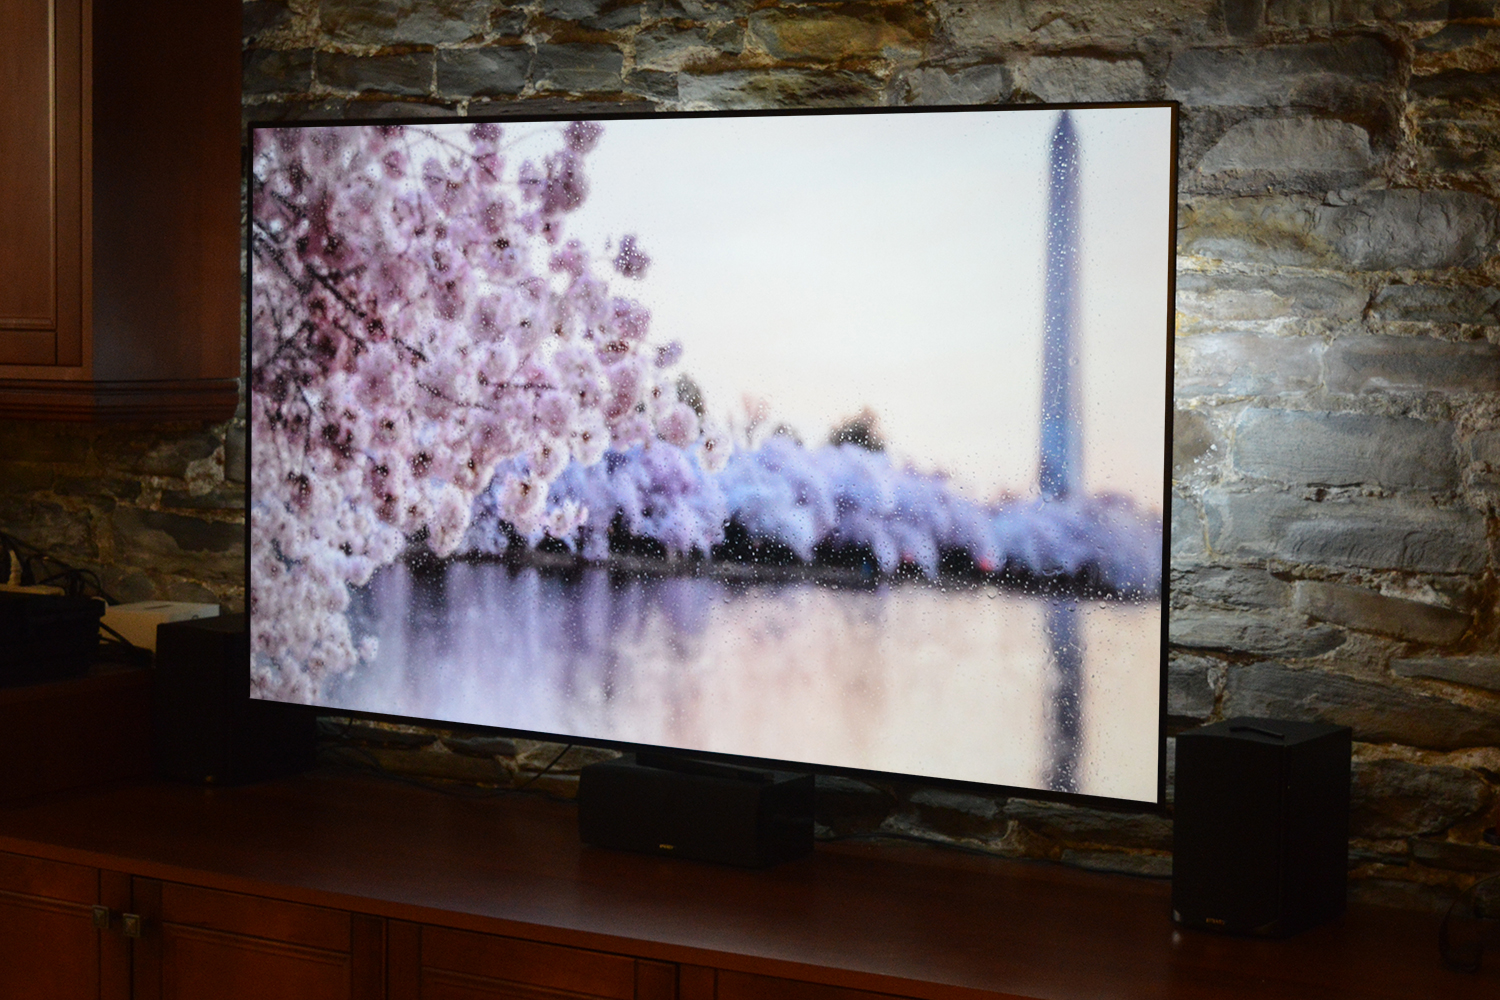 Samsung TVs are getting an exciting upgrade thanks to Philips Hue